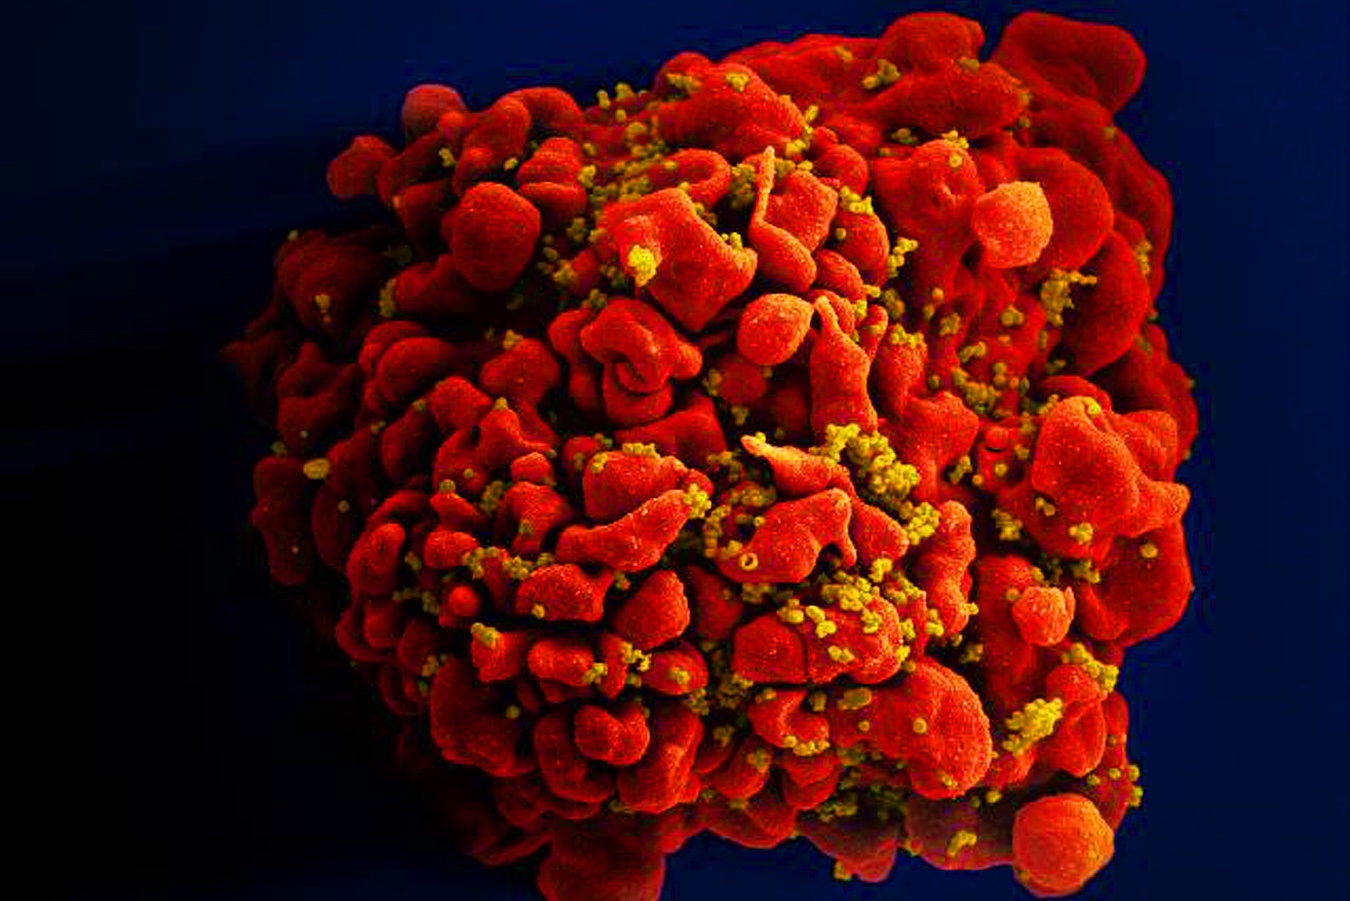 HIV infecting an immune cell